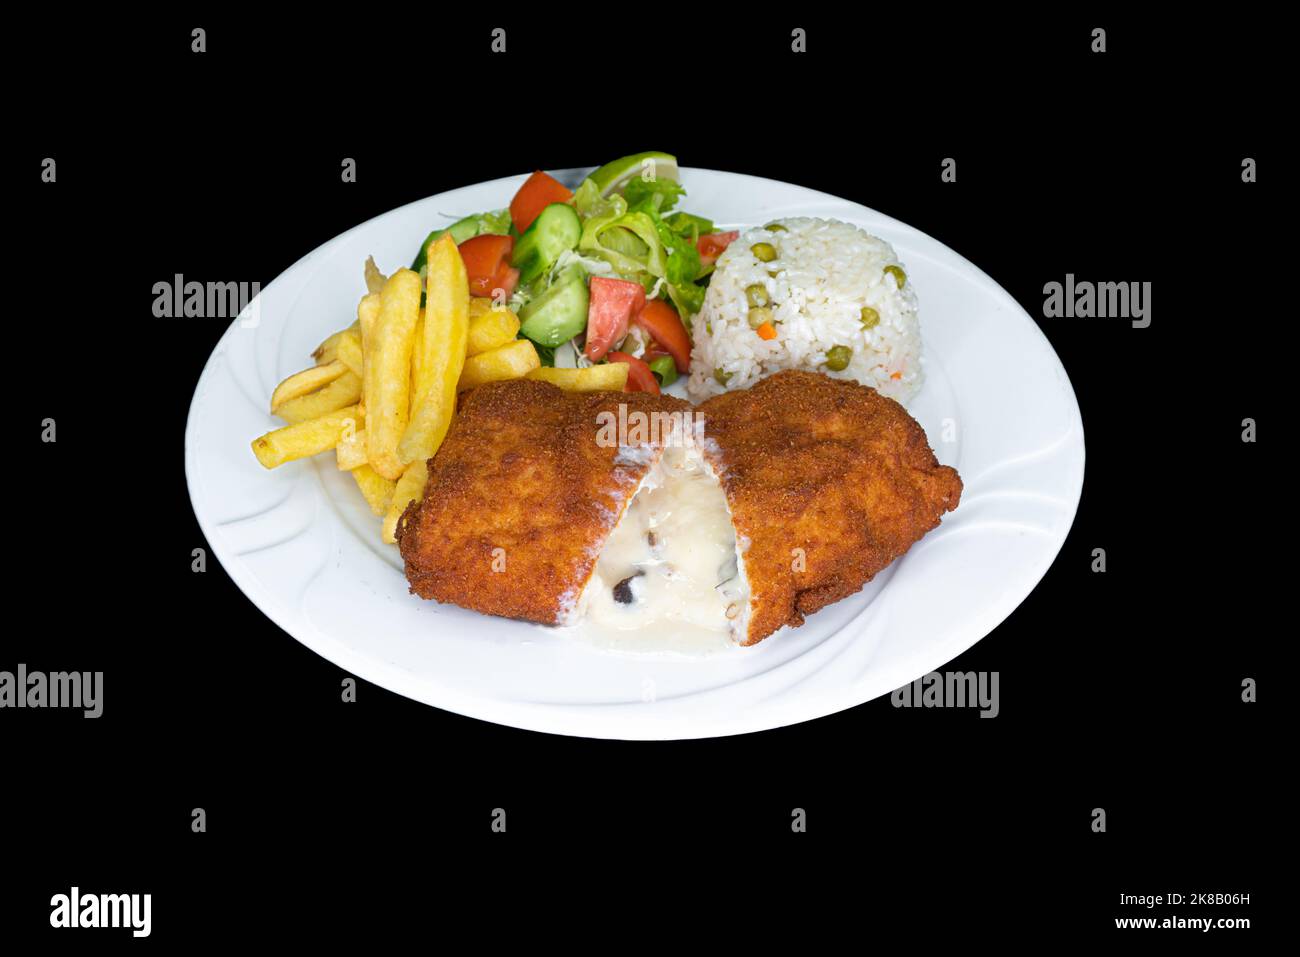 Stuffed chicken wings in a white plate on a black background Stock Photo